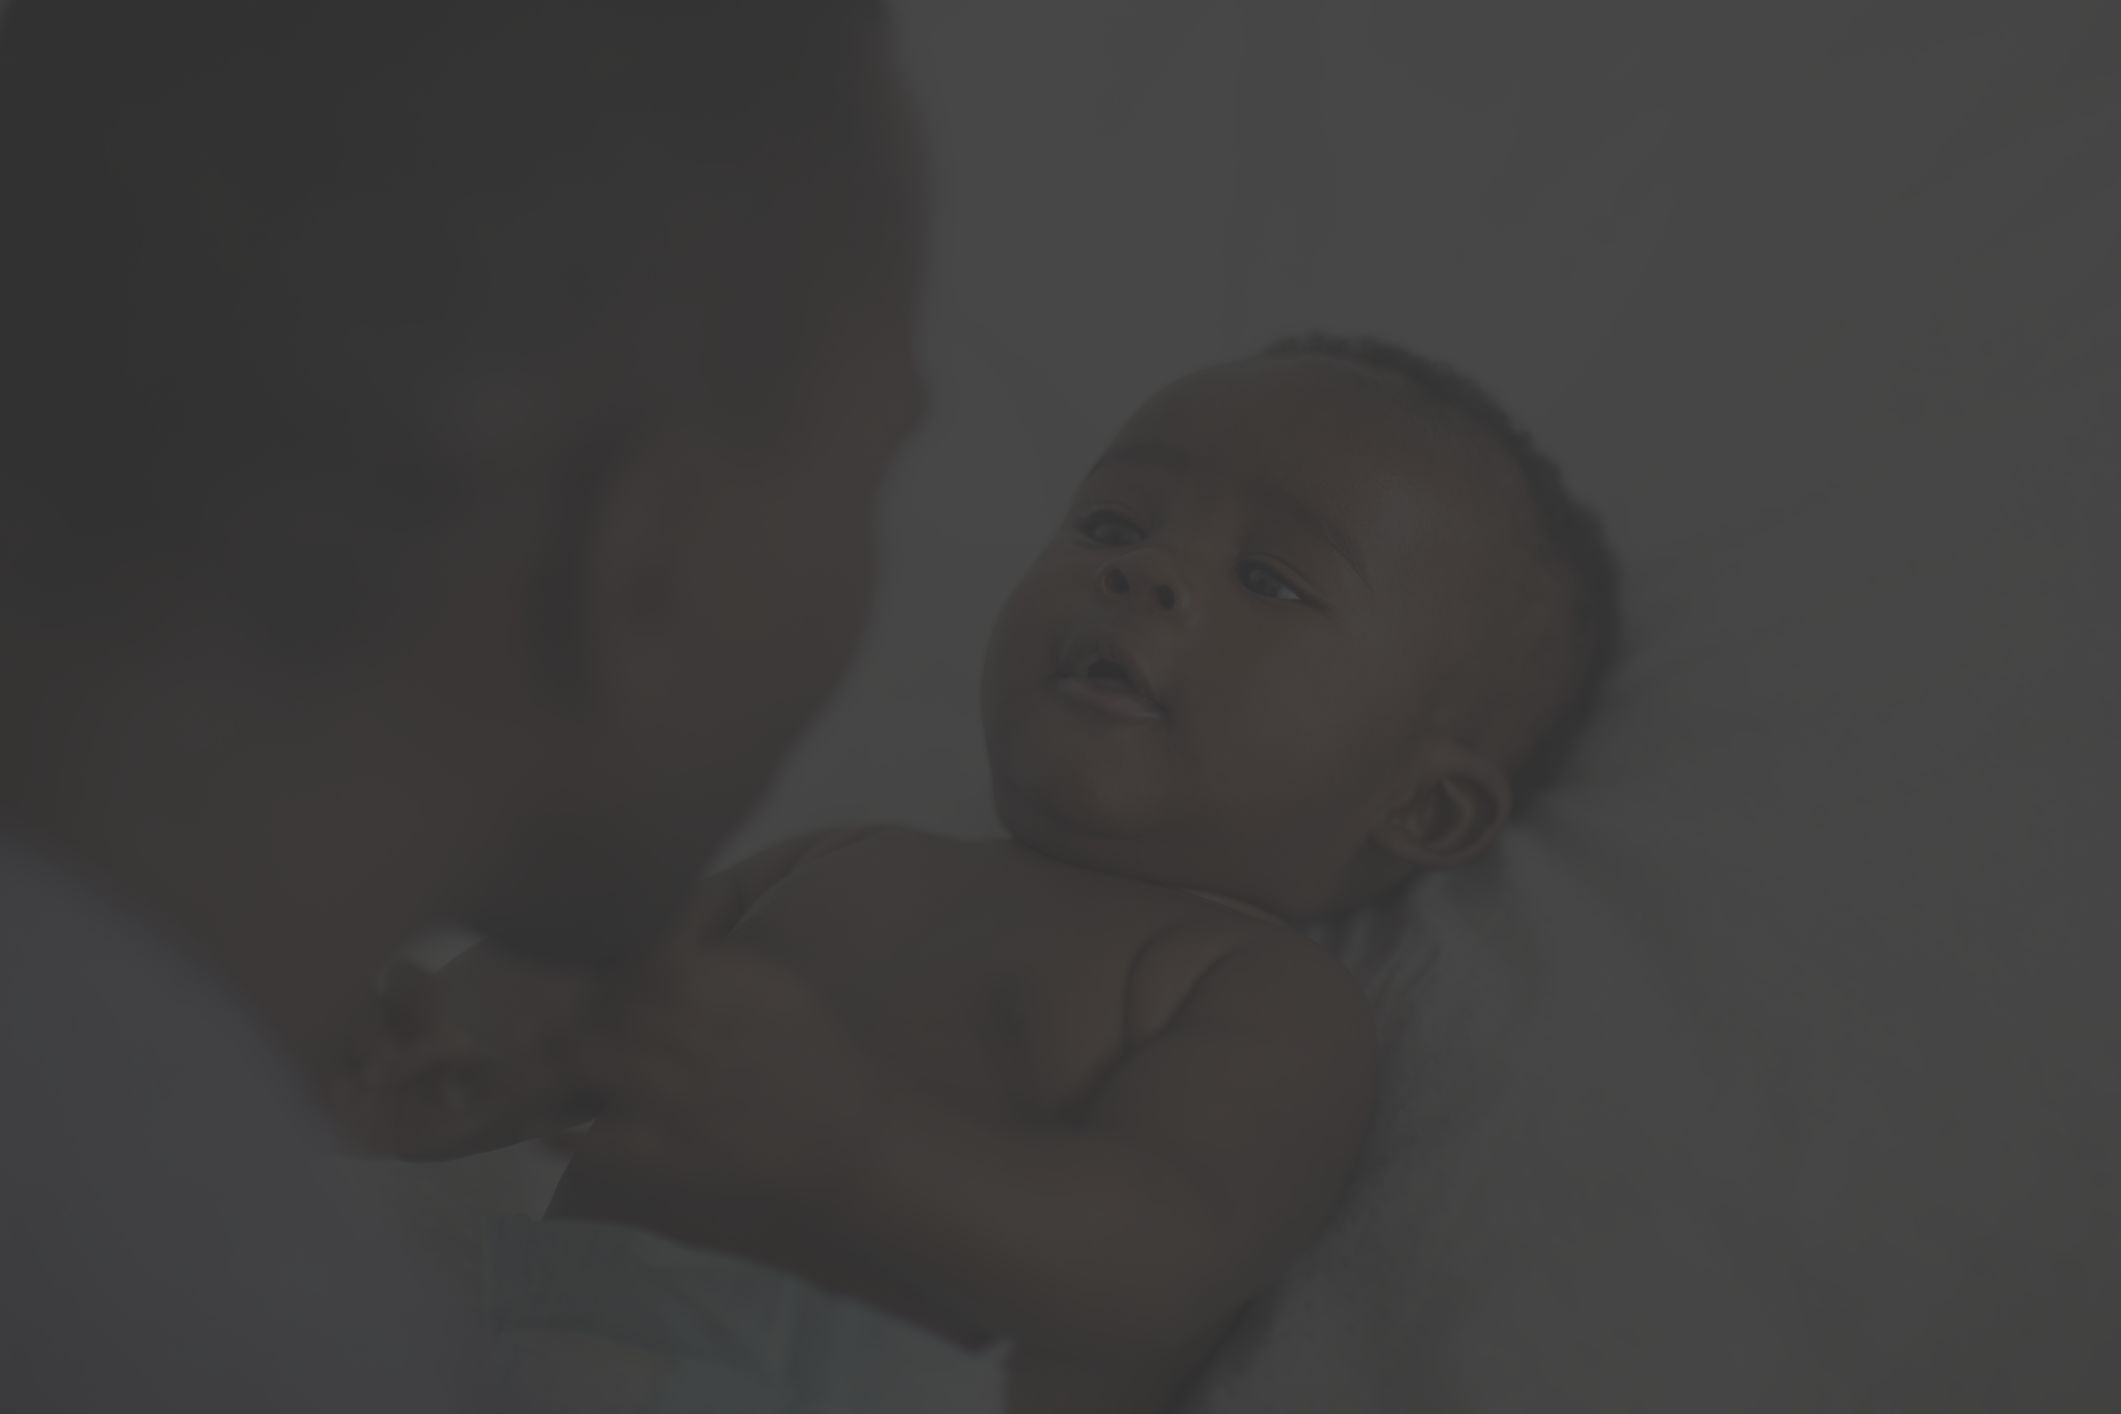 a Black man looks at his infant child 